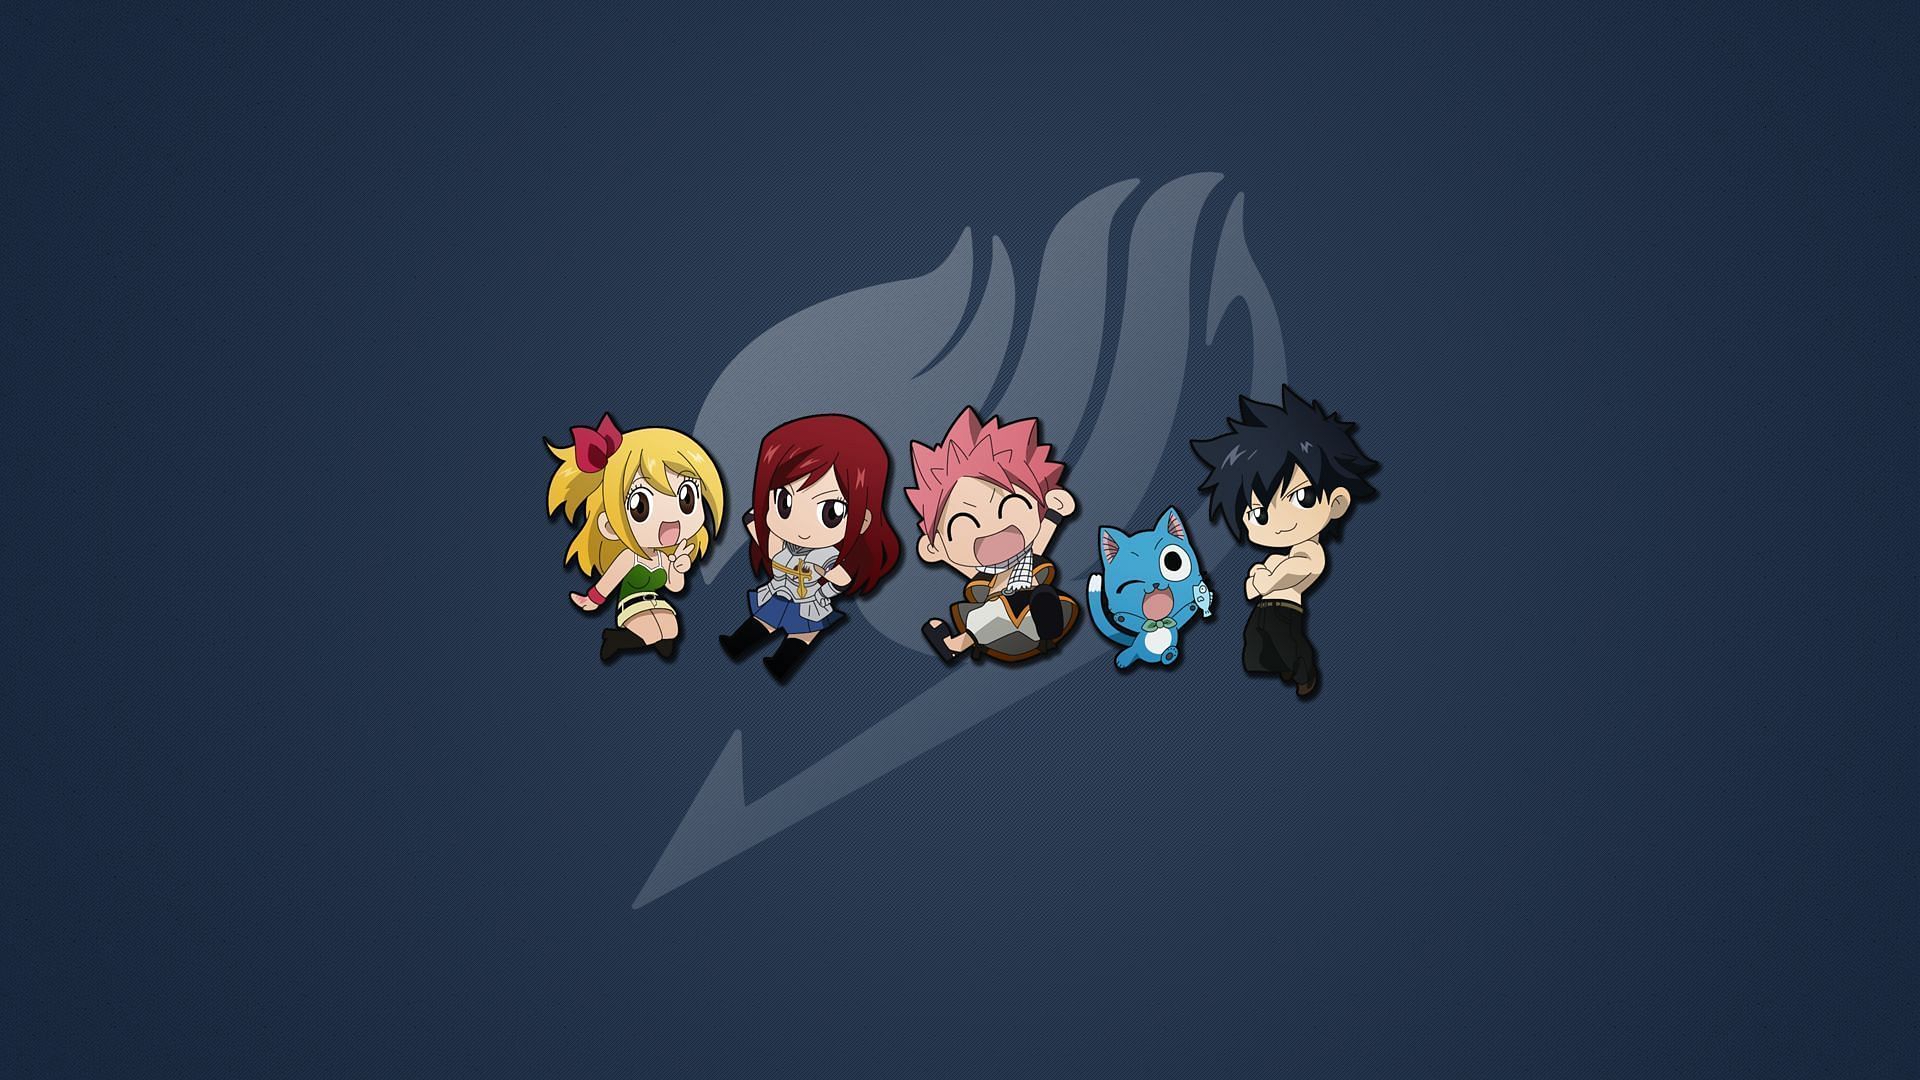 Fairy Tail Guild (Image via A-1 Pictures)